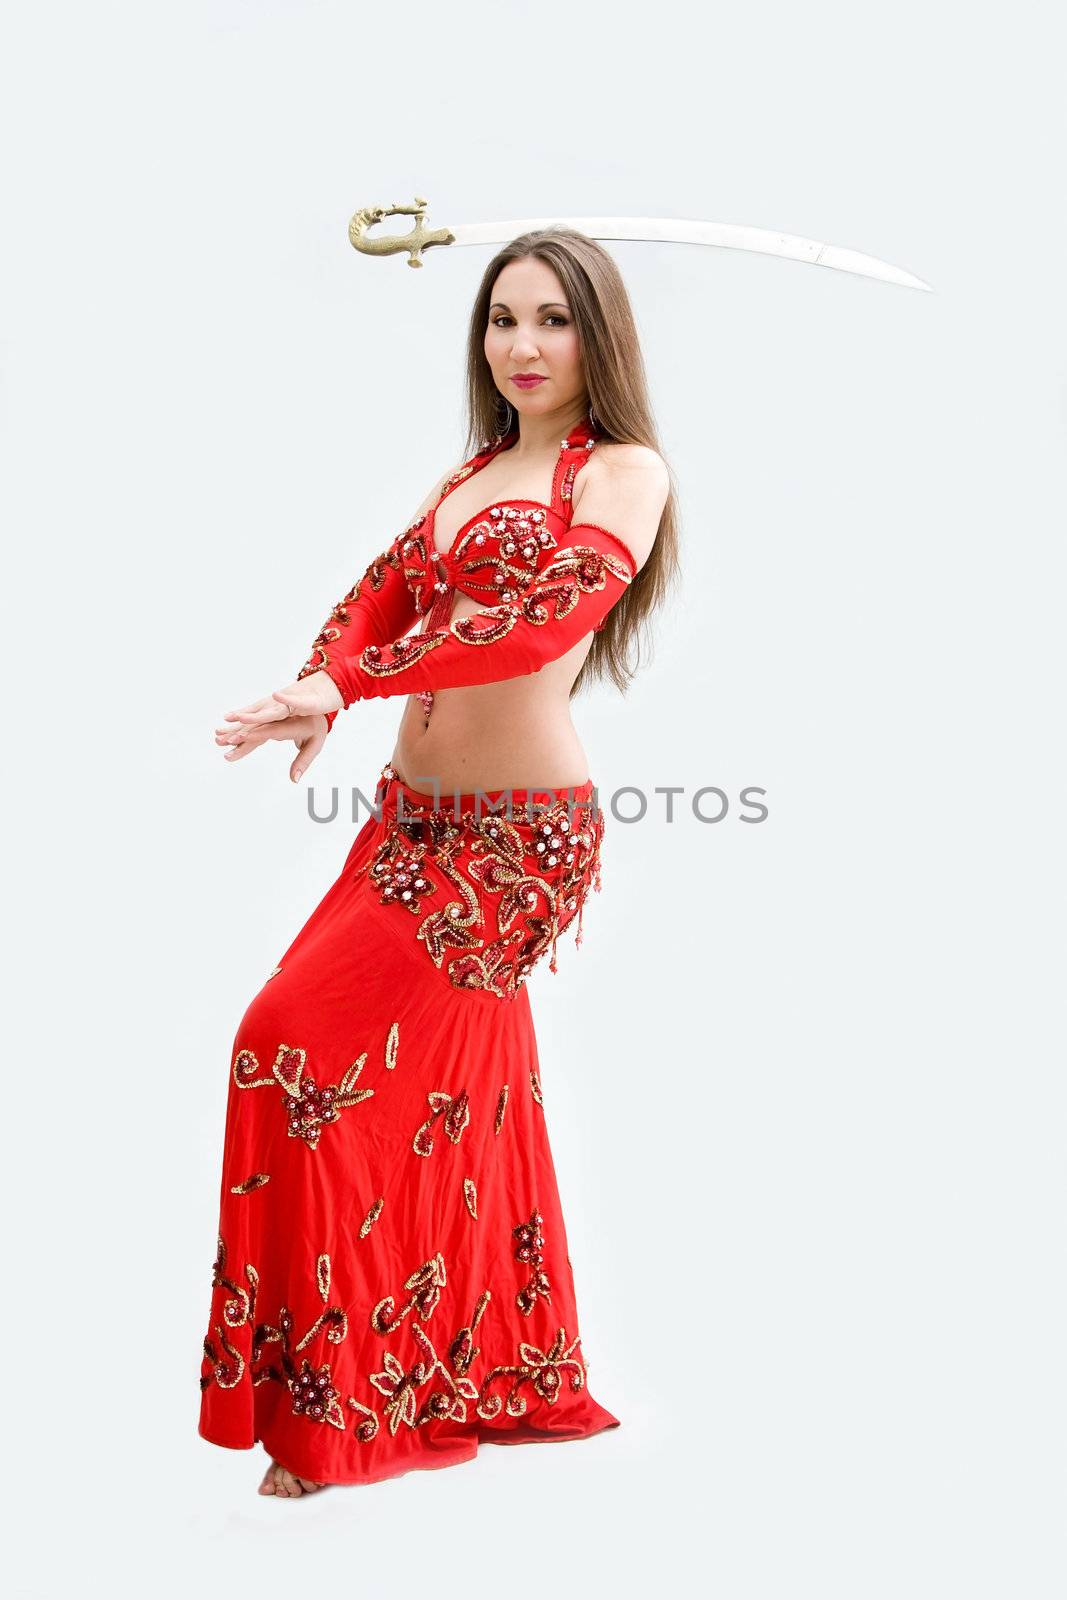 Beautiful belly dancer in red outfit balancing sword, isolated